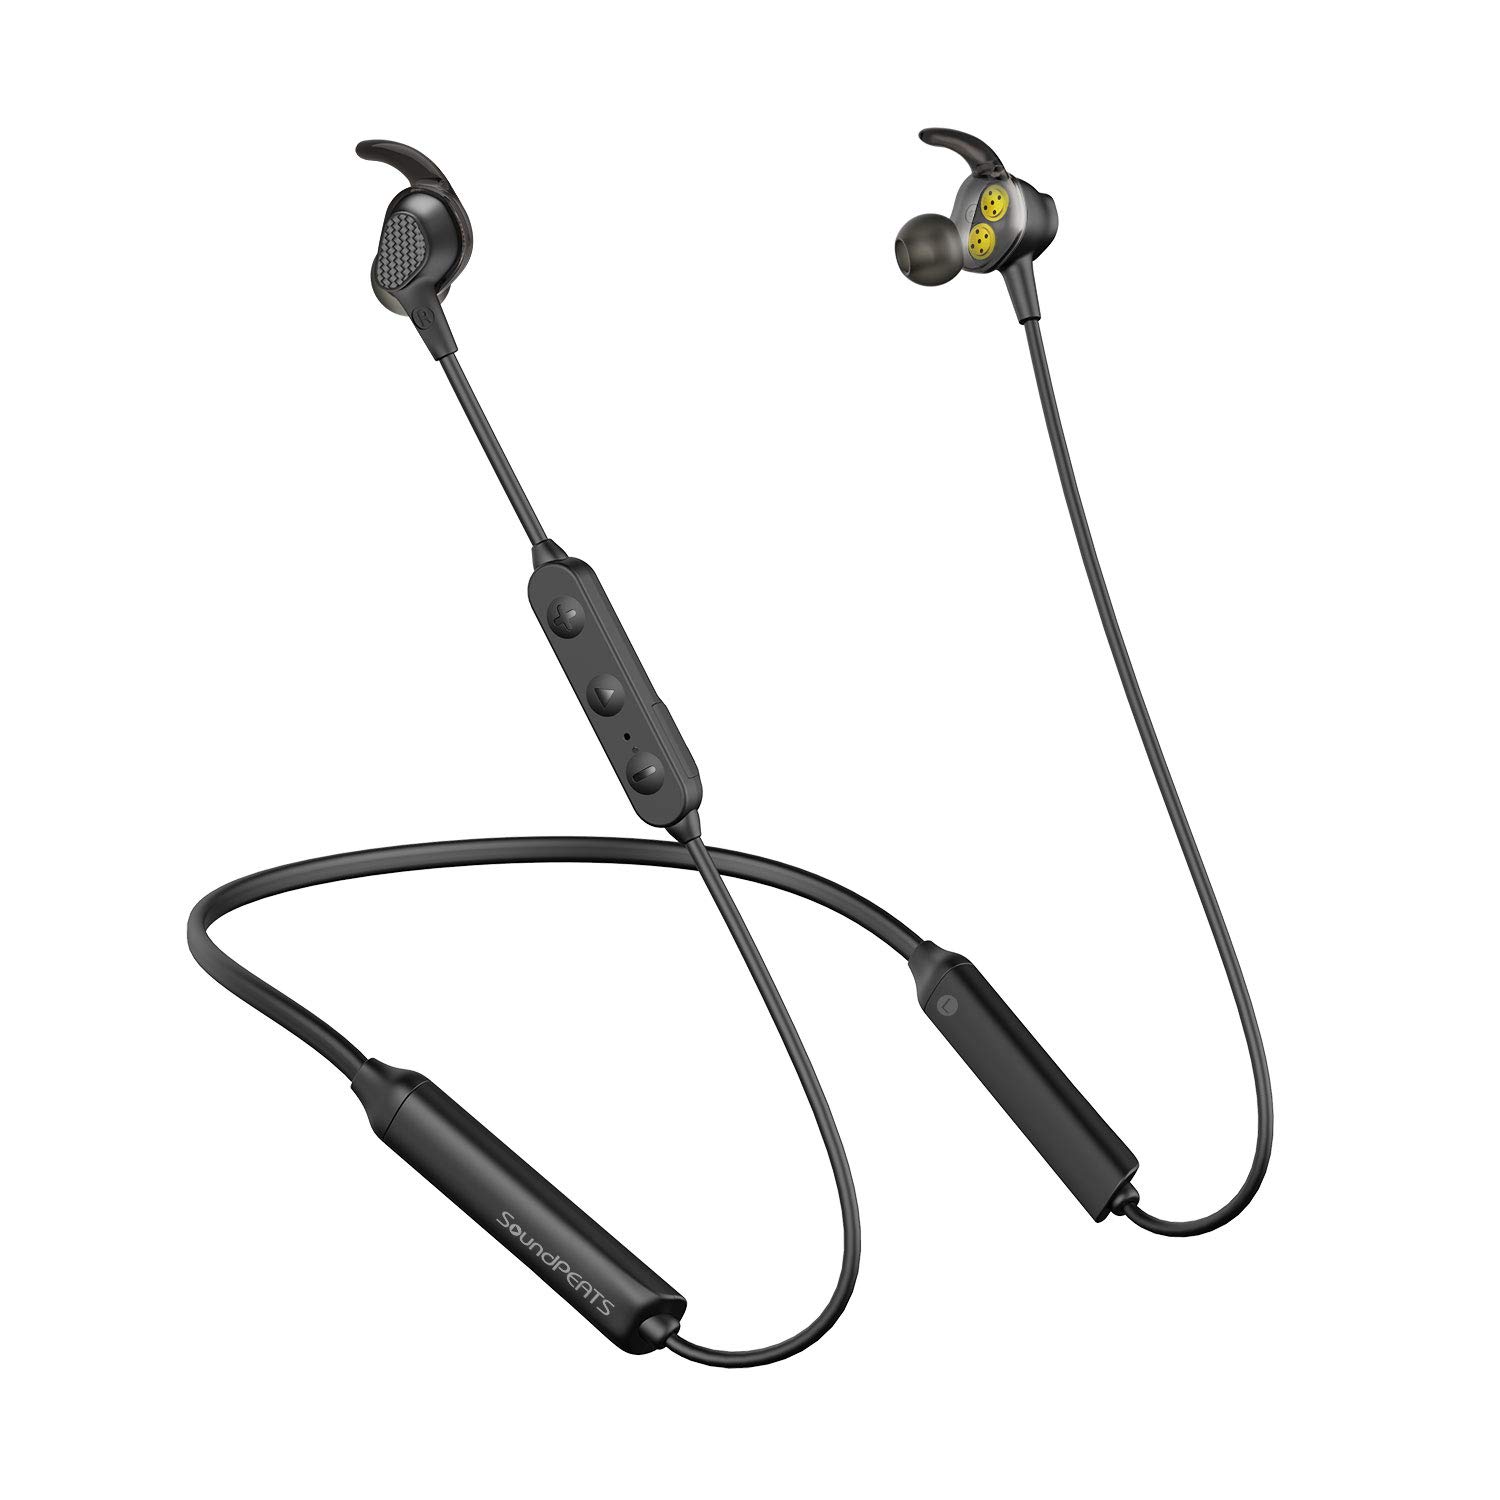 SoundPEATS Bluetooth Wireless Headphone, in-Ear Earbuds Dual Dynamic Drivers Earphones with CVC 6.0 Mic and Volume Control, IPX6 Sweatproof, 13Hour Playtime Earbuds